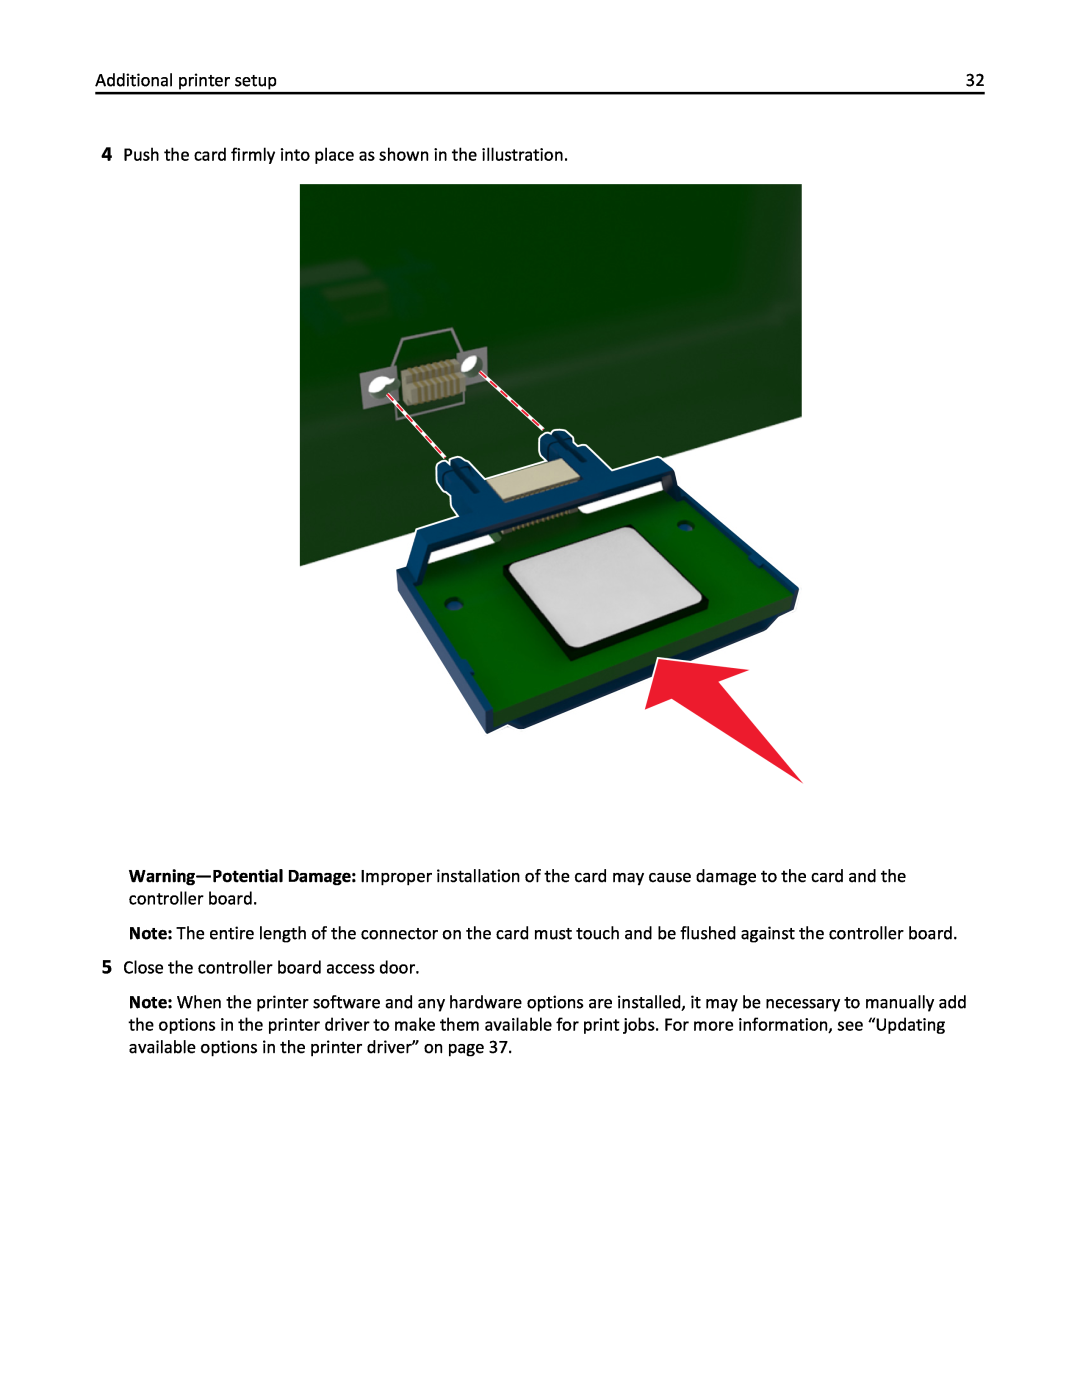 Lexmark 436 manual Additional printer setup, Push the card firmly into place as shown in the illustration 